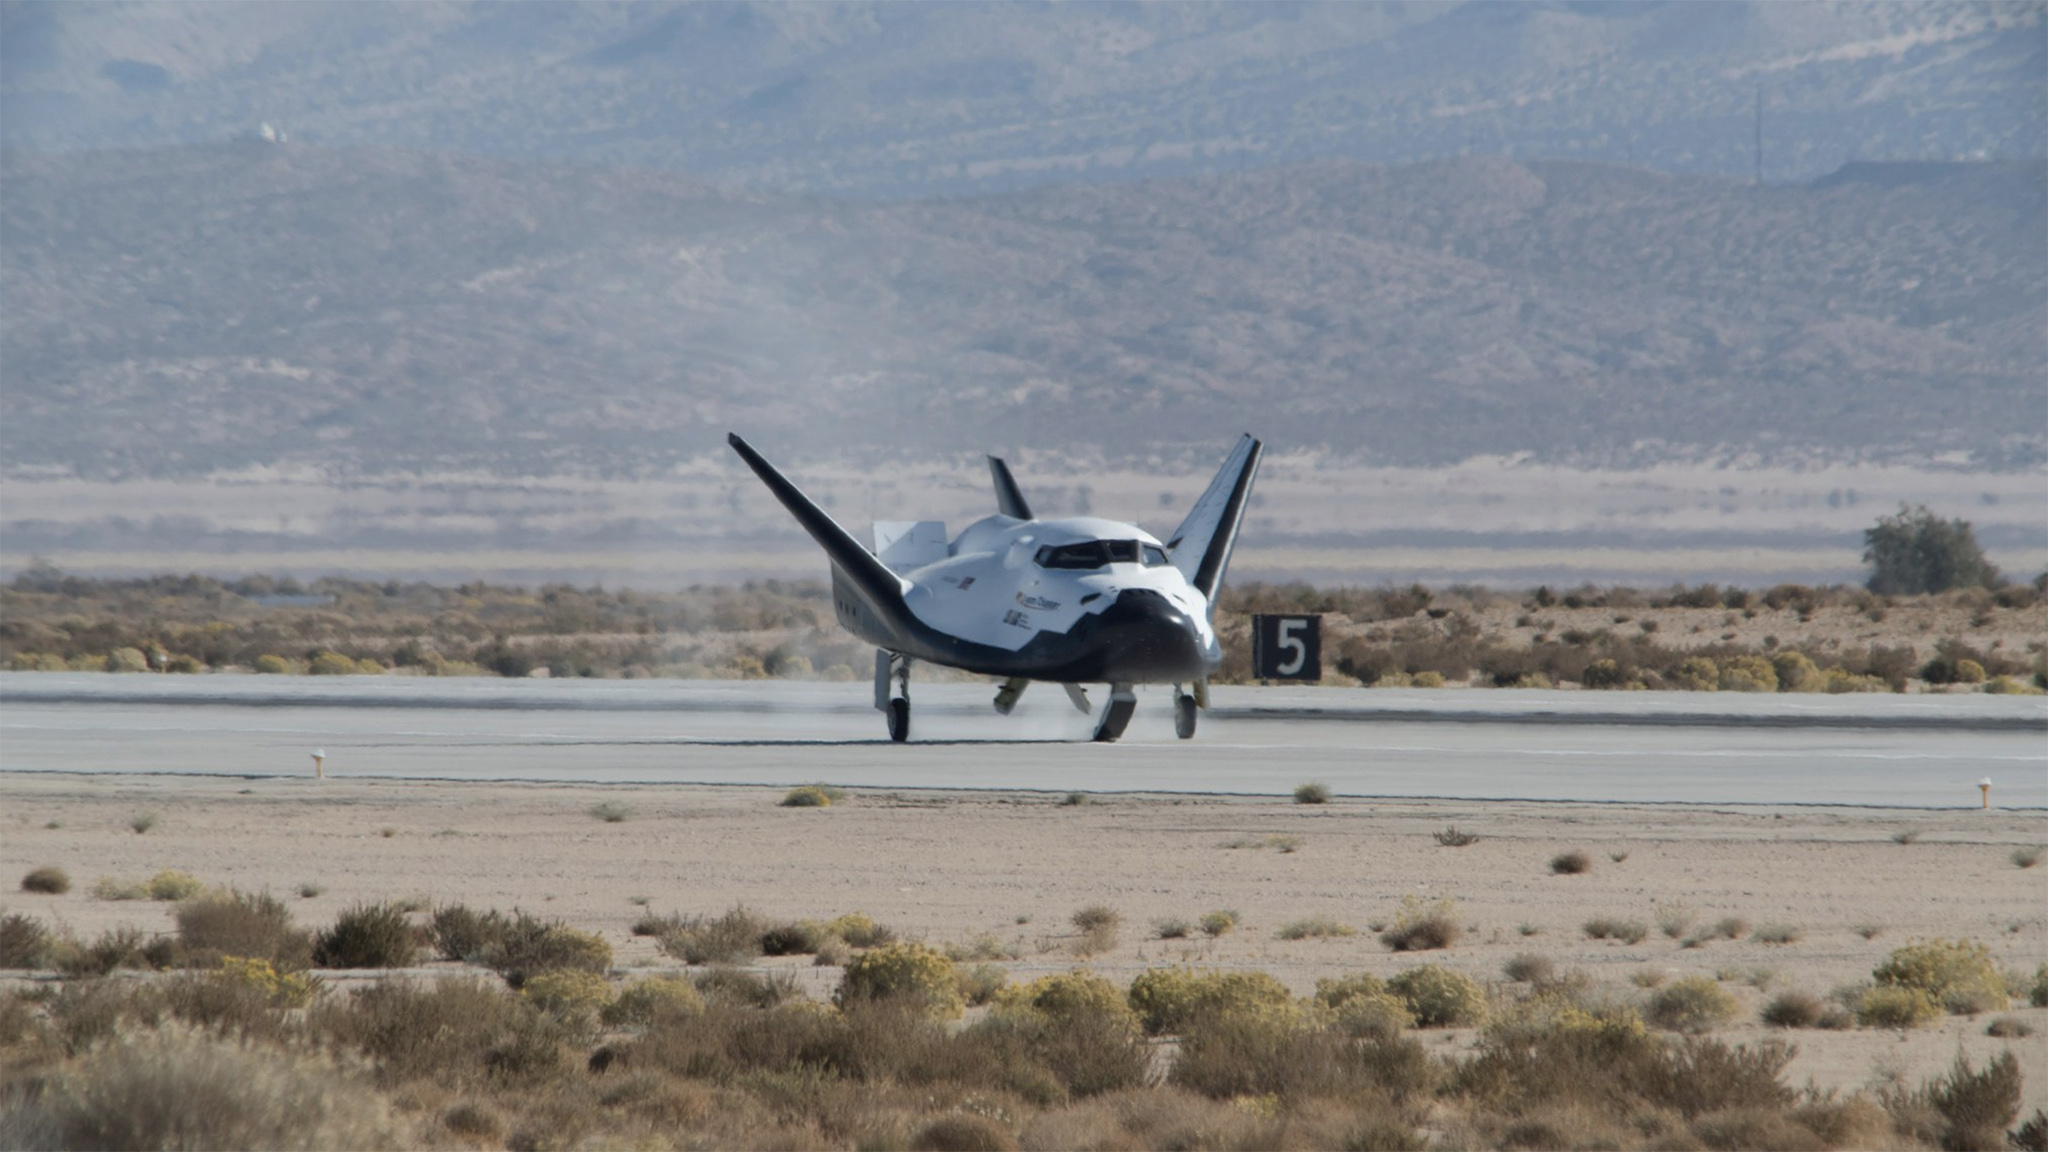 Mini Space Shuttle 'Dream Chaser' Completes Successful Test Flight ...